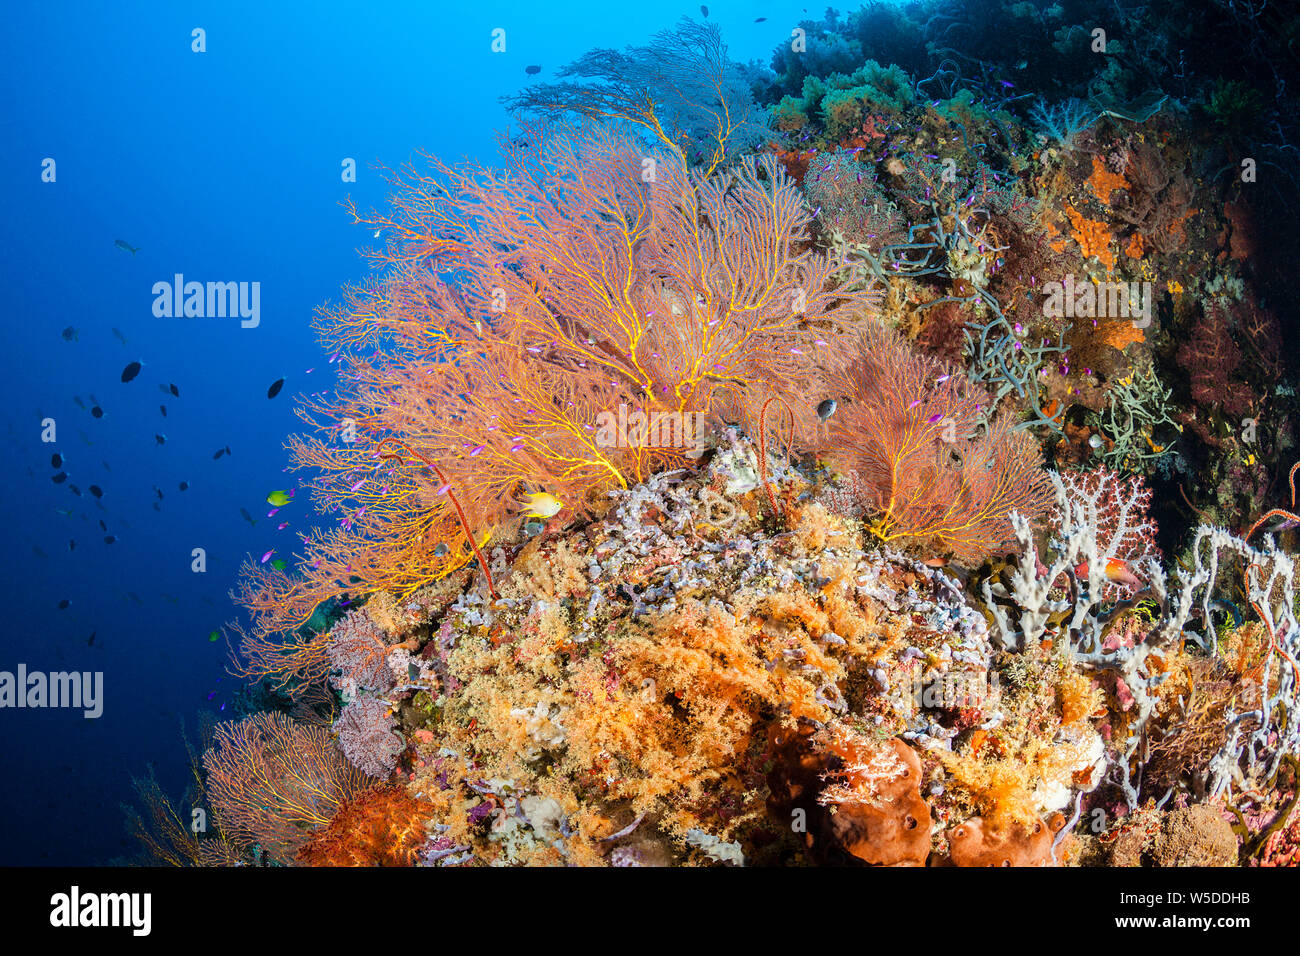 Species rich Coral Reef, Kimbe Bay, New Britain, Papua New Guinea Stock Photo